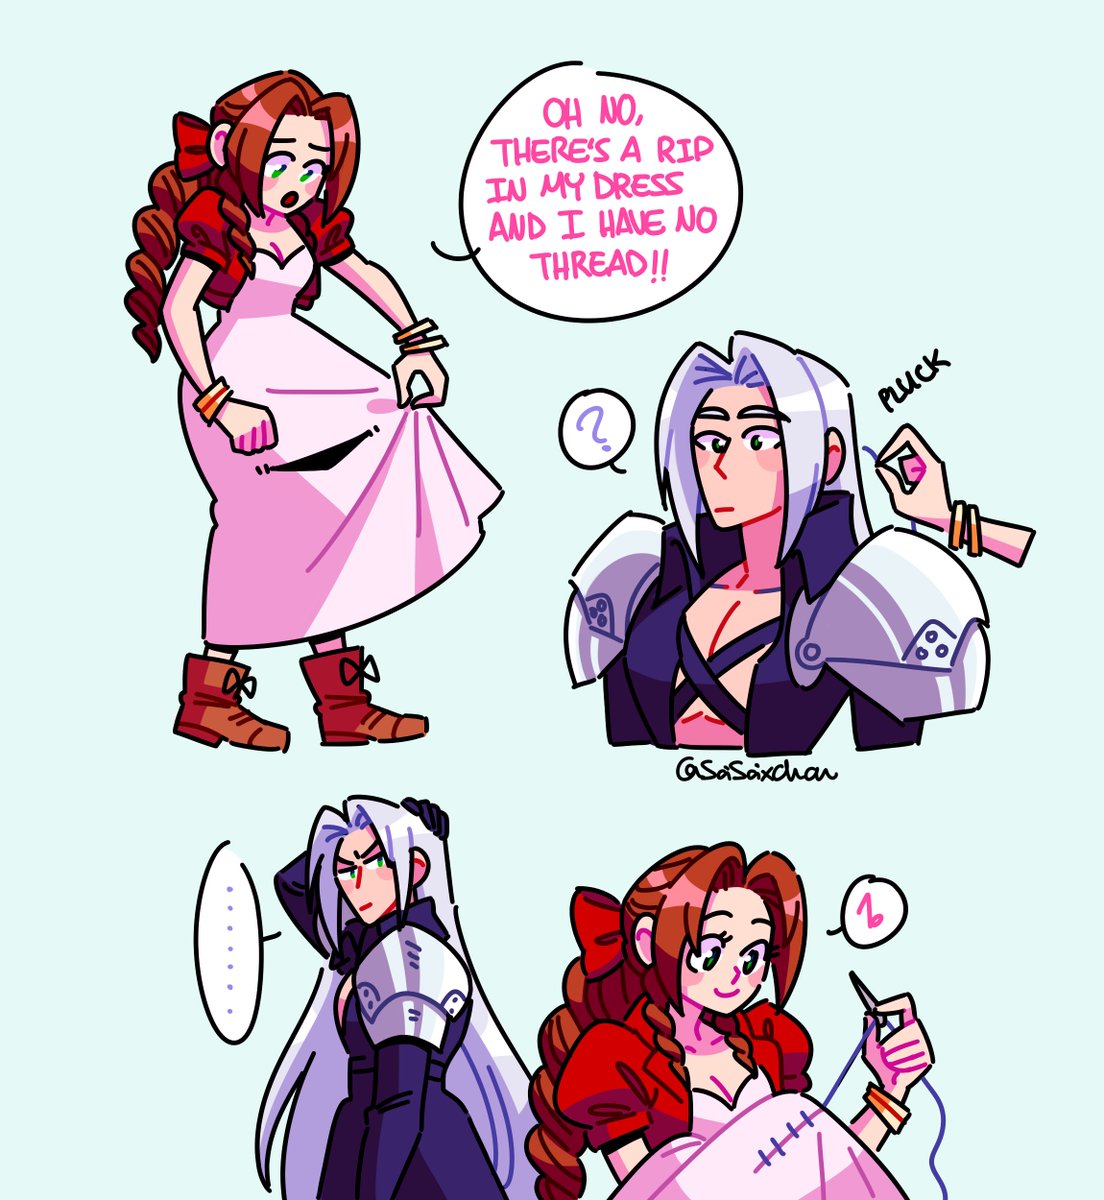 based on a silly thing my friend said to me 
anywhere i still haven't seen or played this game lmao
#Sephiroth #Aerith #FF7 